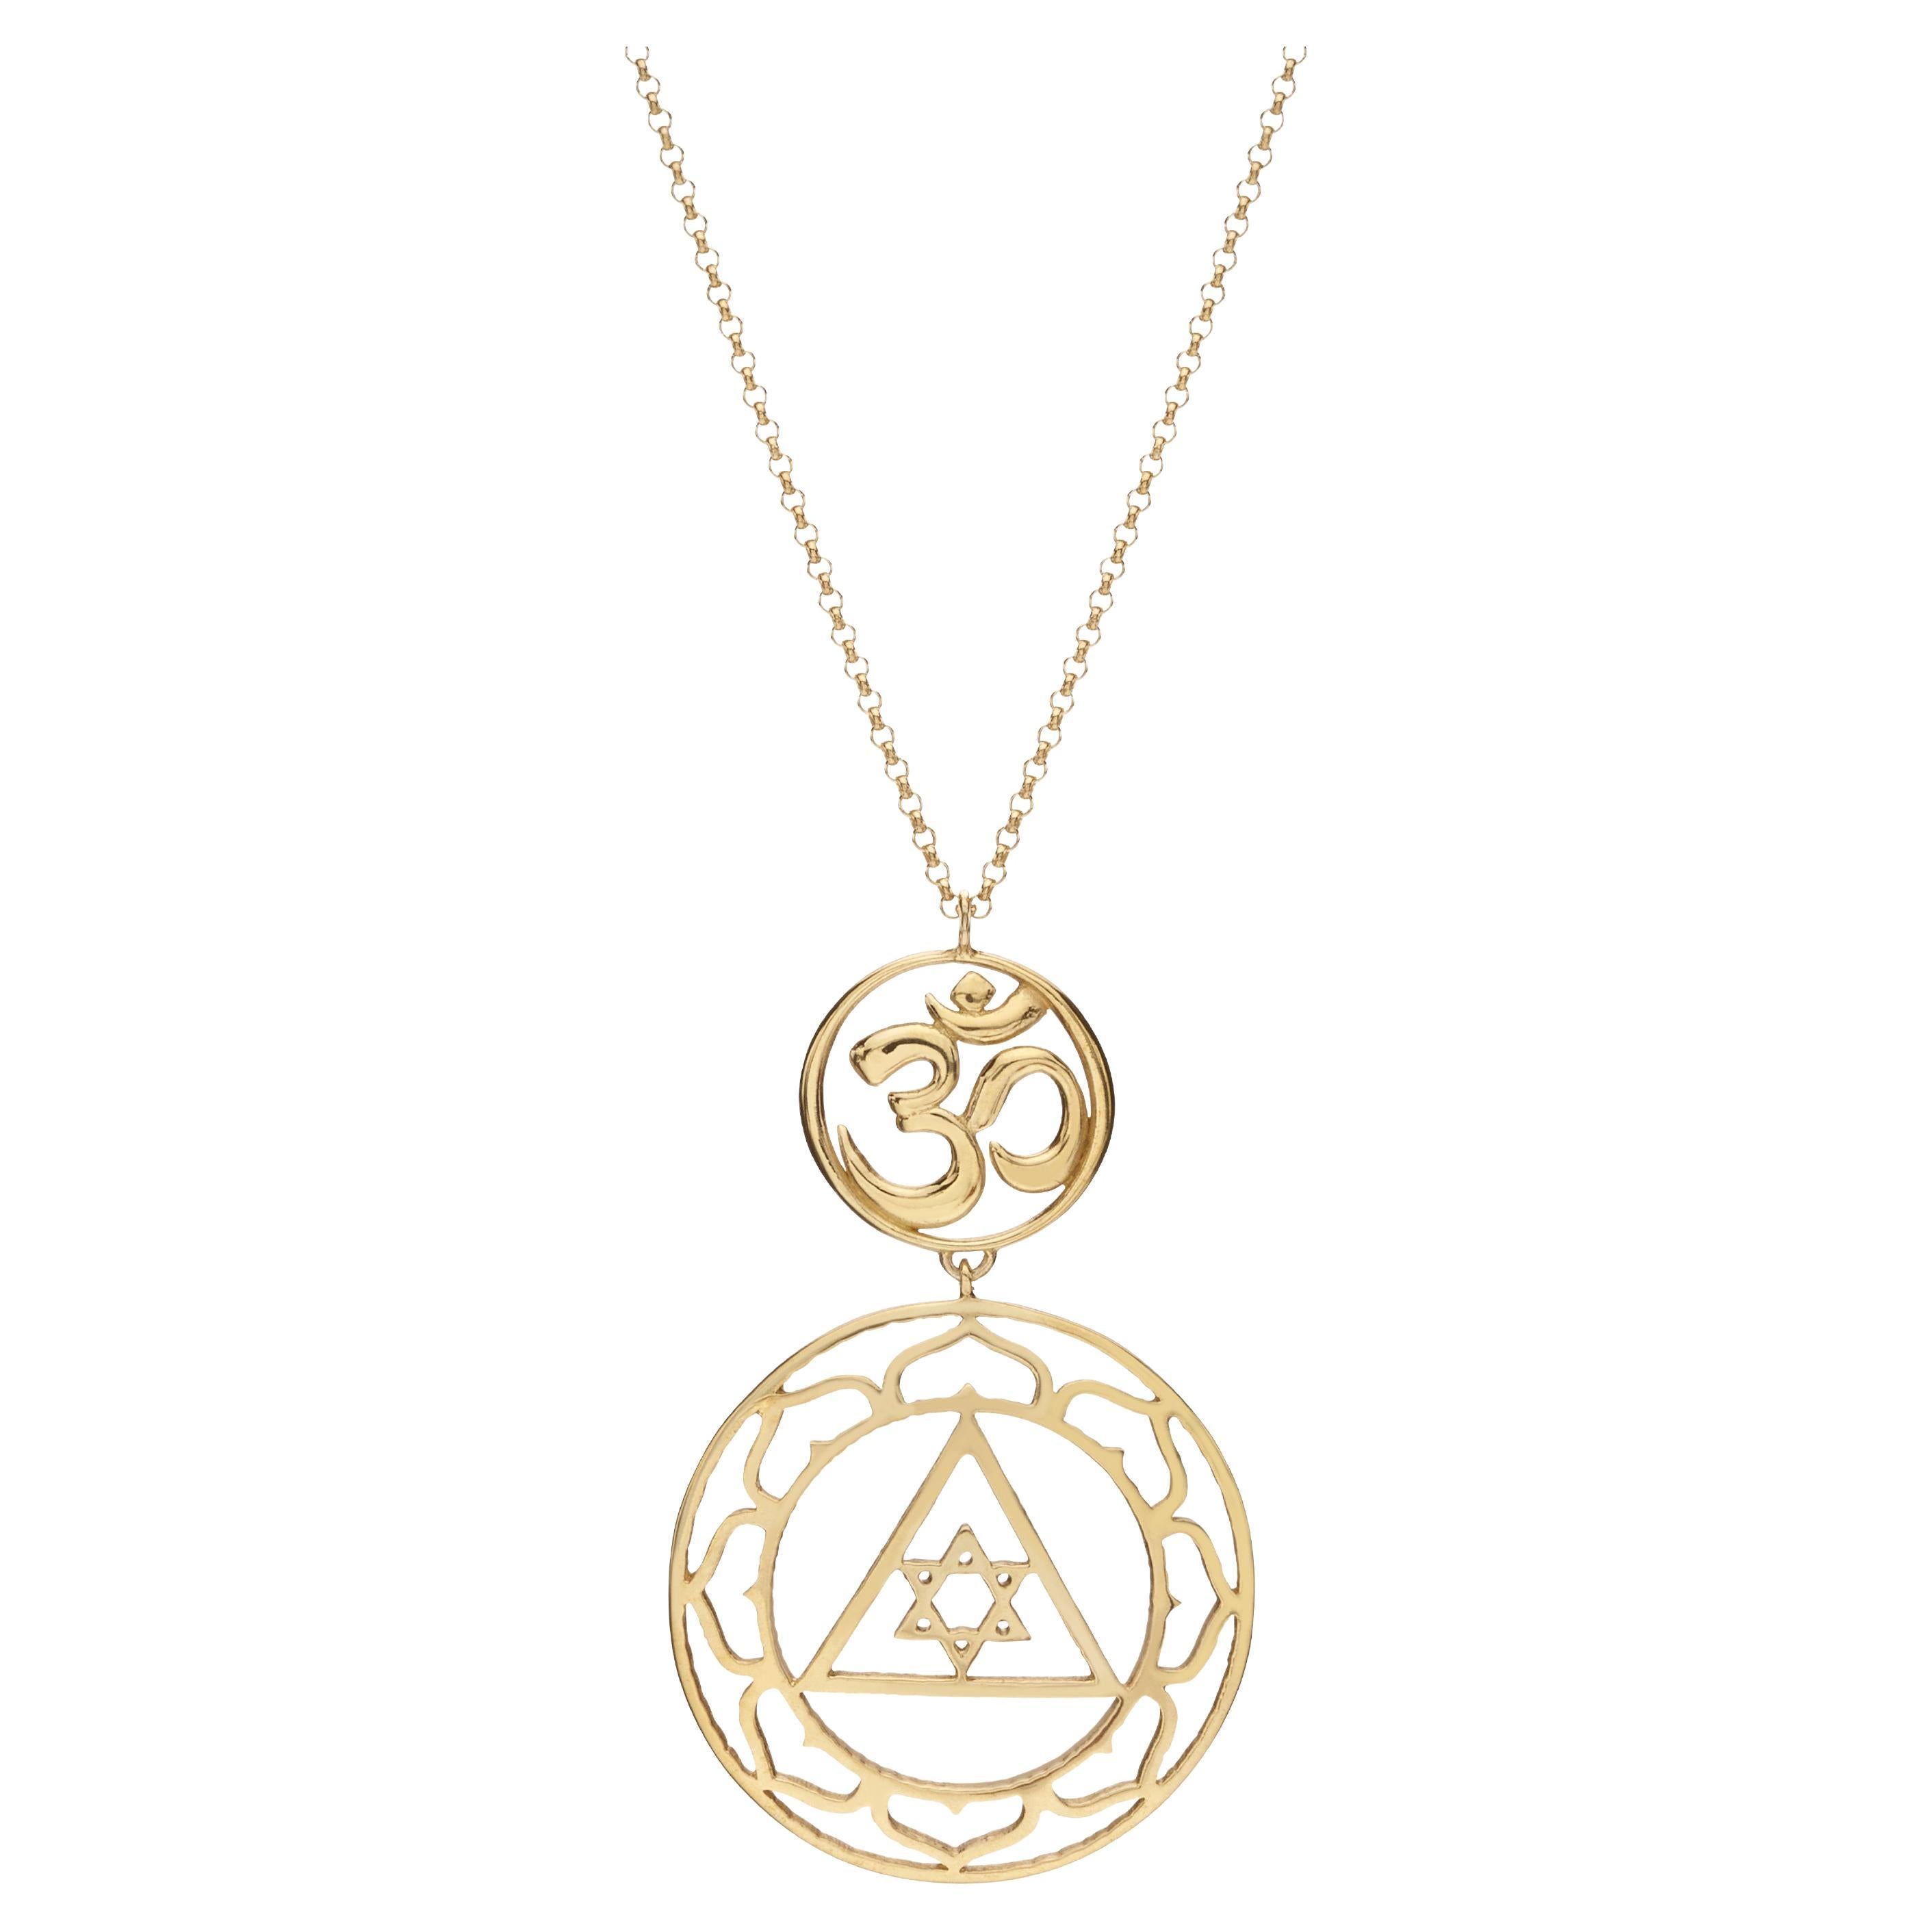 Handcrafted Pendant Necklace with Genesh Yantra and Om Aum Symbol in 14Kt Gold